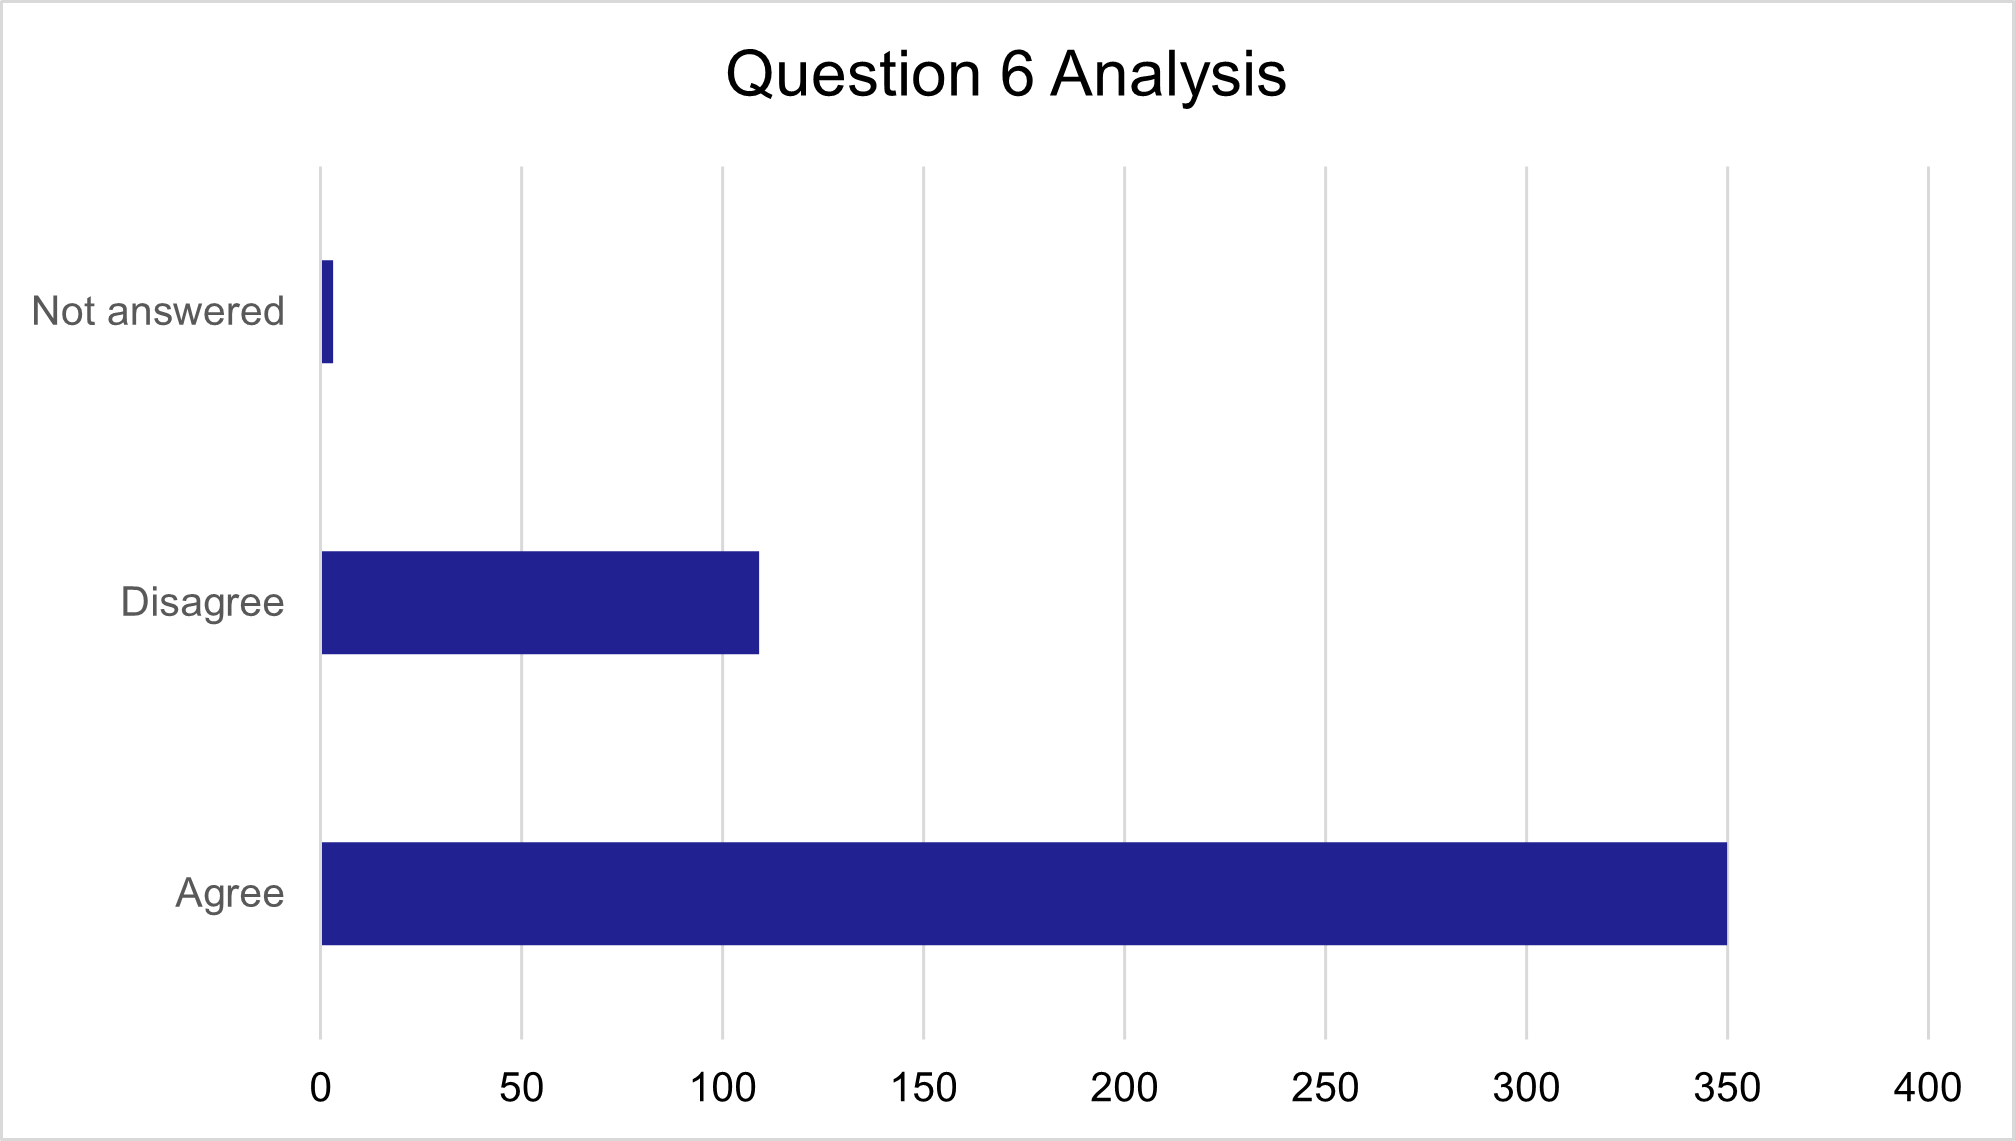 Question 6 responses, as described in text